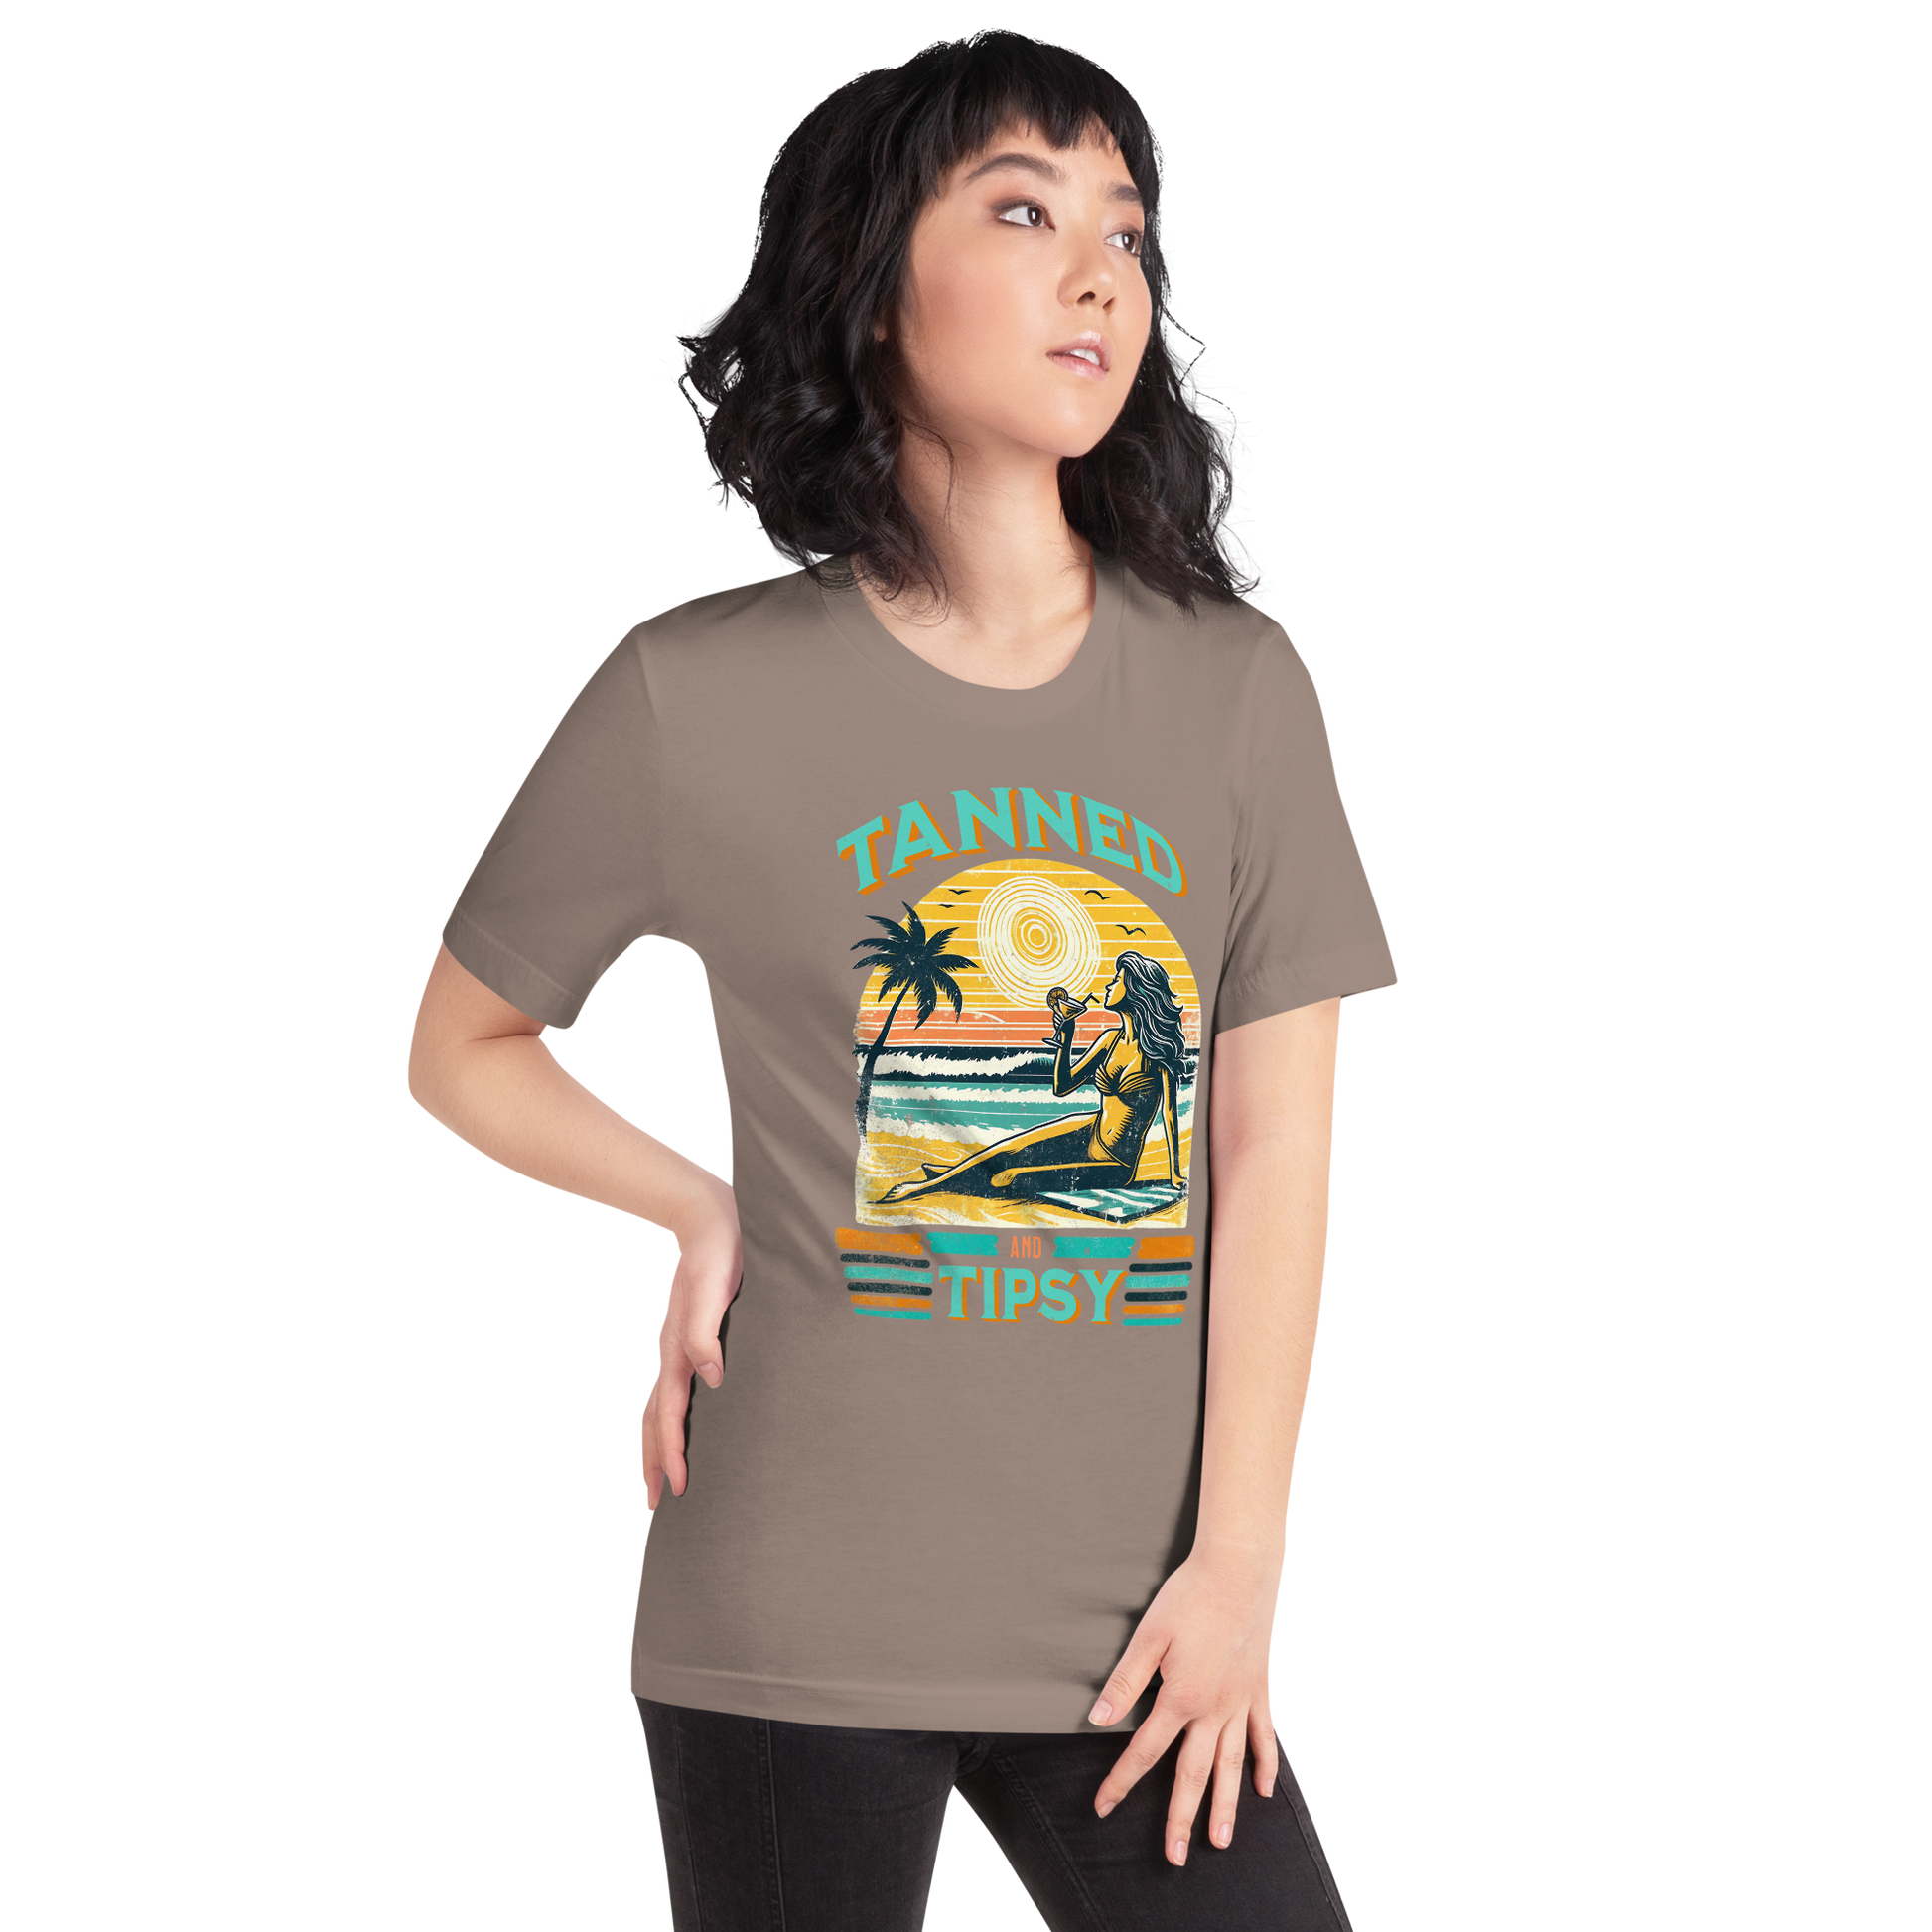 Vintage-inspired 'Tanned and Tipsy' tee with a woman sipping a cocktail on a beach at sunset, perfect for beach drinking and summer parties.